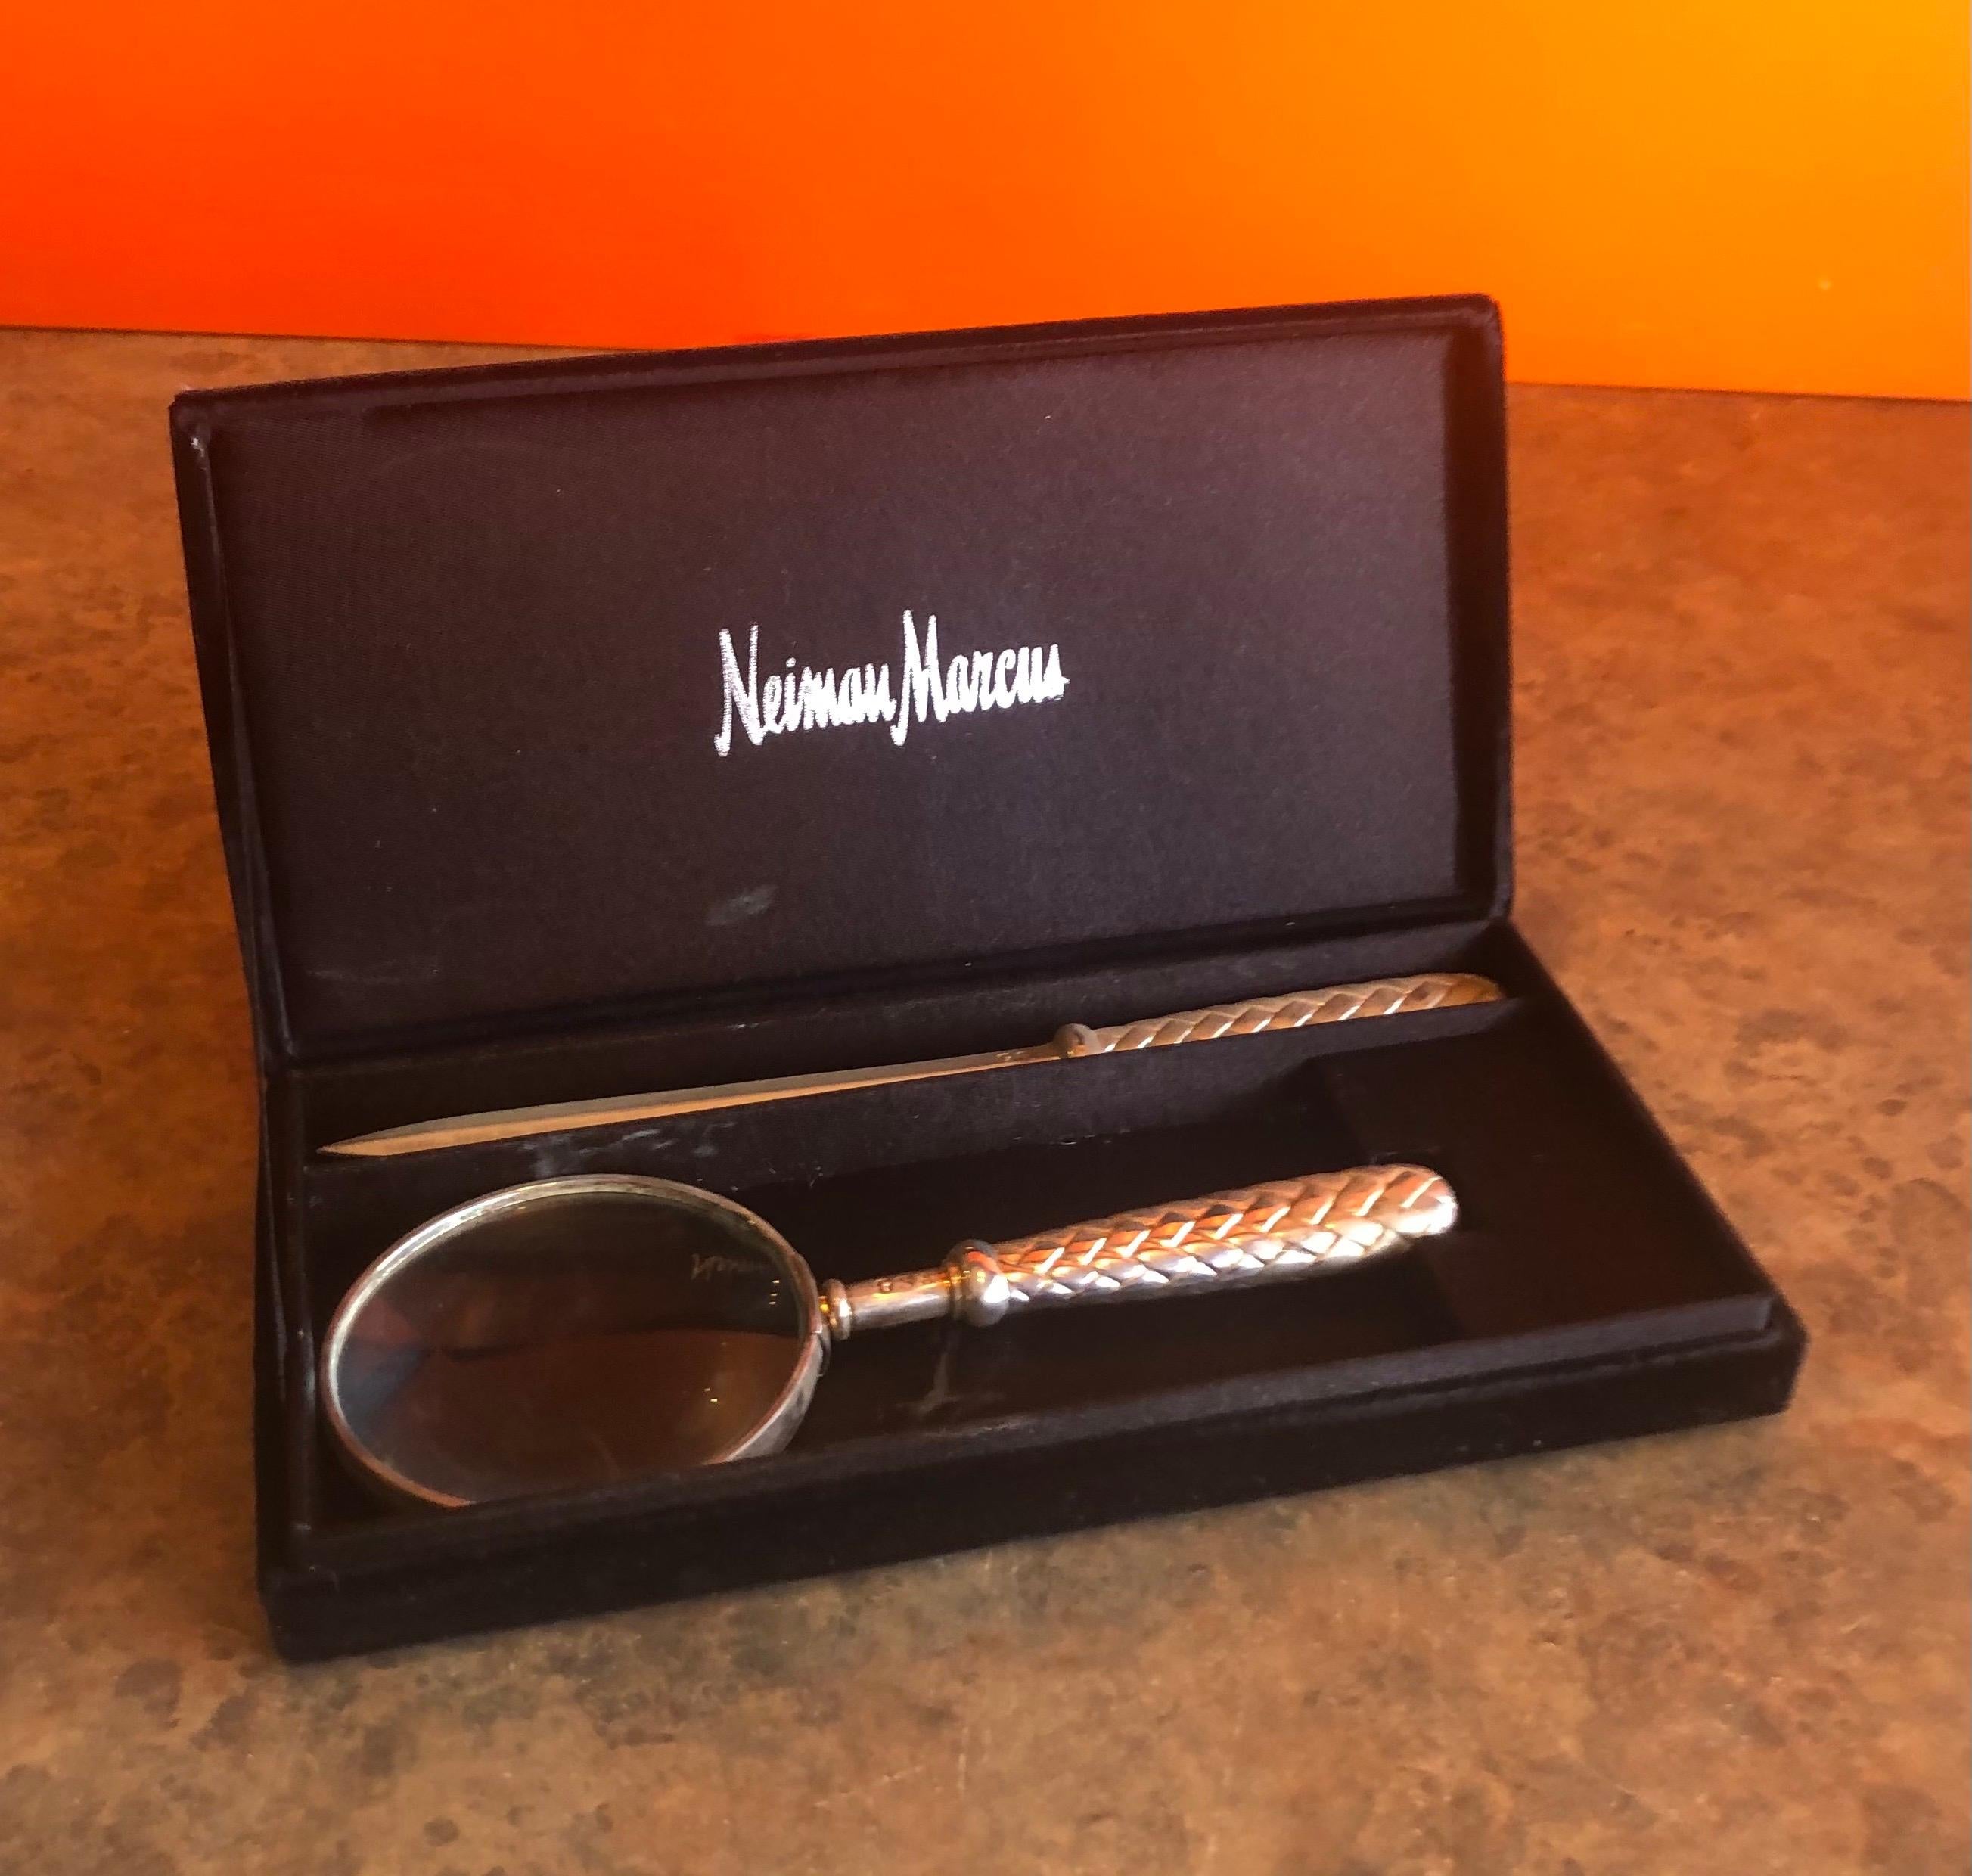 Vintage silver plated magnifying glass and letter opener set by Godinger Silver Art (GSA) for Neiman Marcus, circa 1990s. The set is in very good vintage condition and comes with the original NM box. The handles are in an intricate basket weave